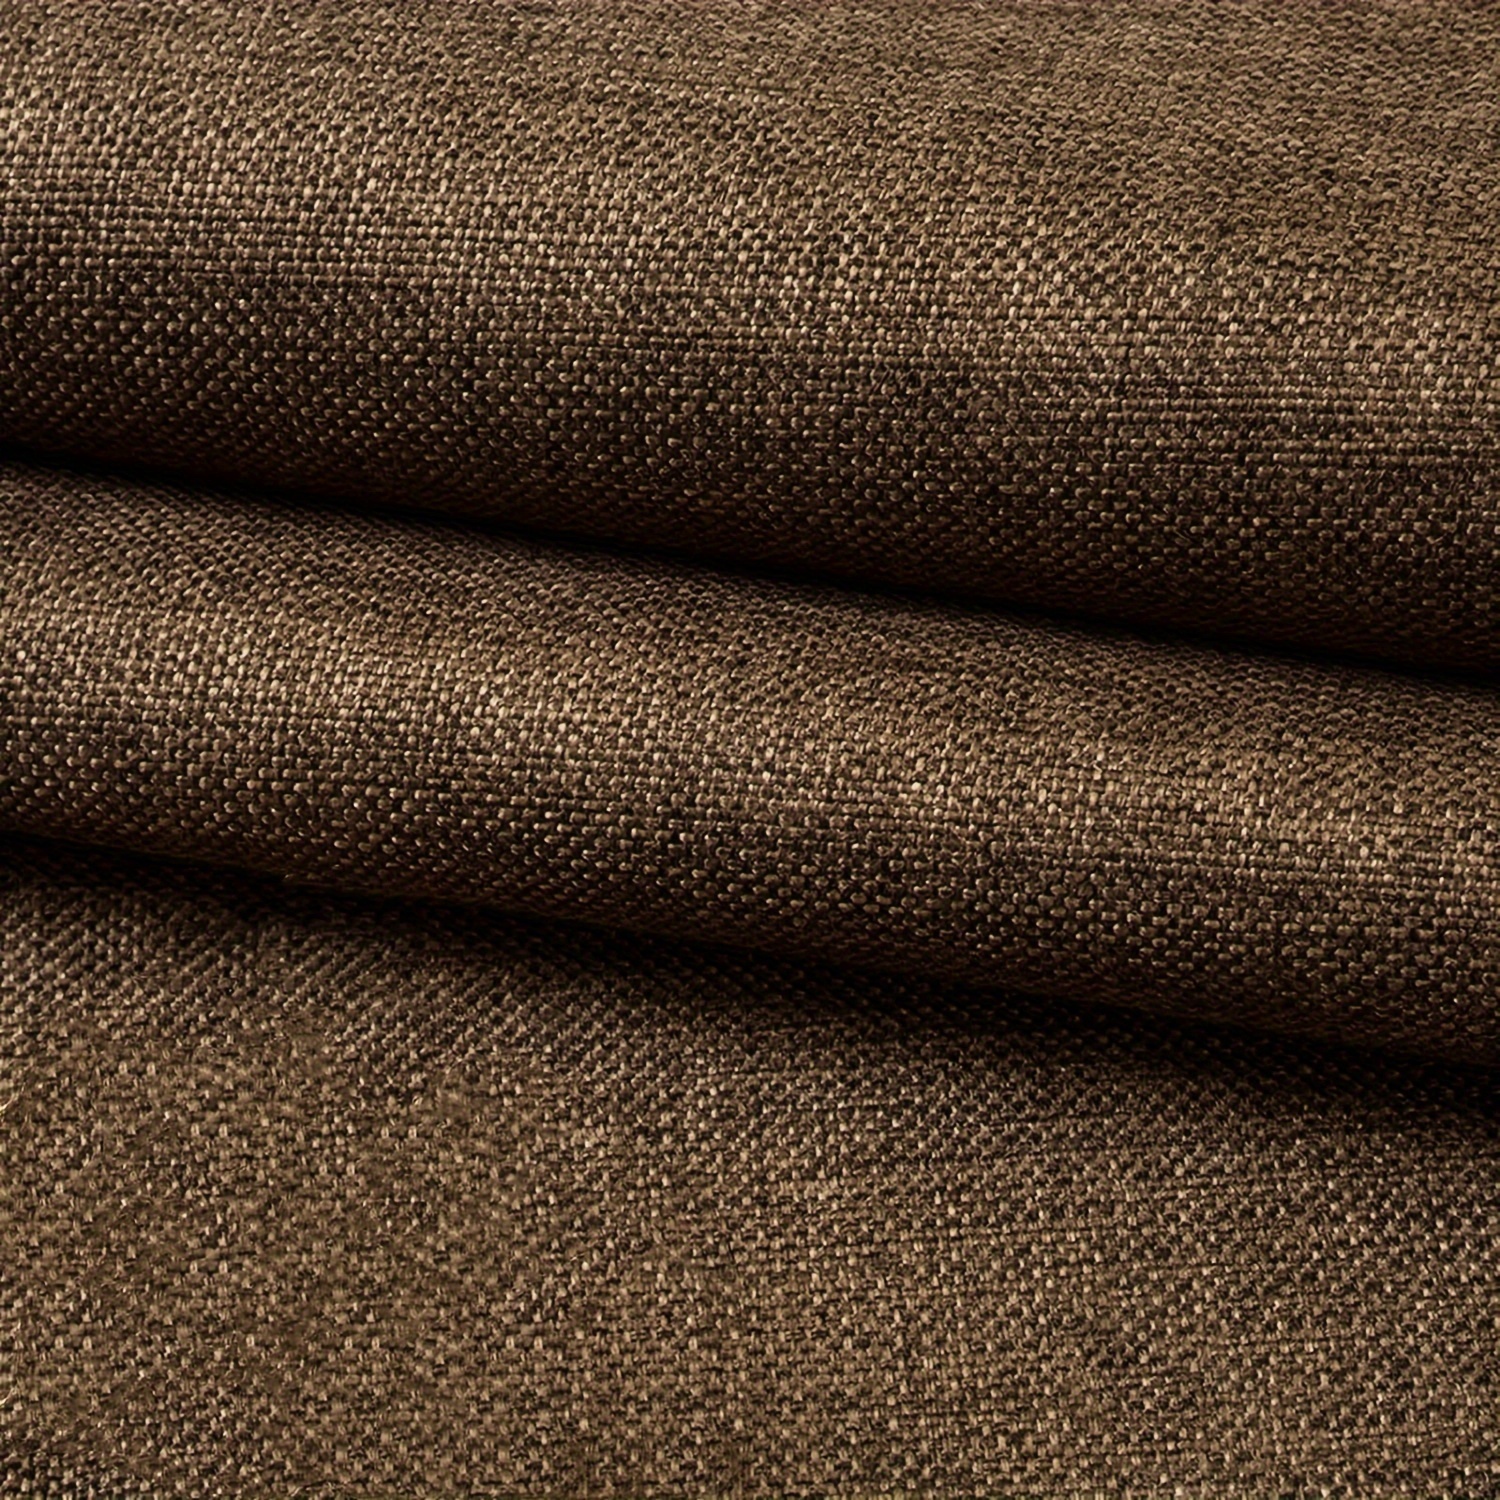 Thick Upholstery Fabric for Chair, Faux Coarse Linen Type Cloth Material,  for Sofa Seat Repair (Brown 15, 1 Yard (57x 36 inch))